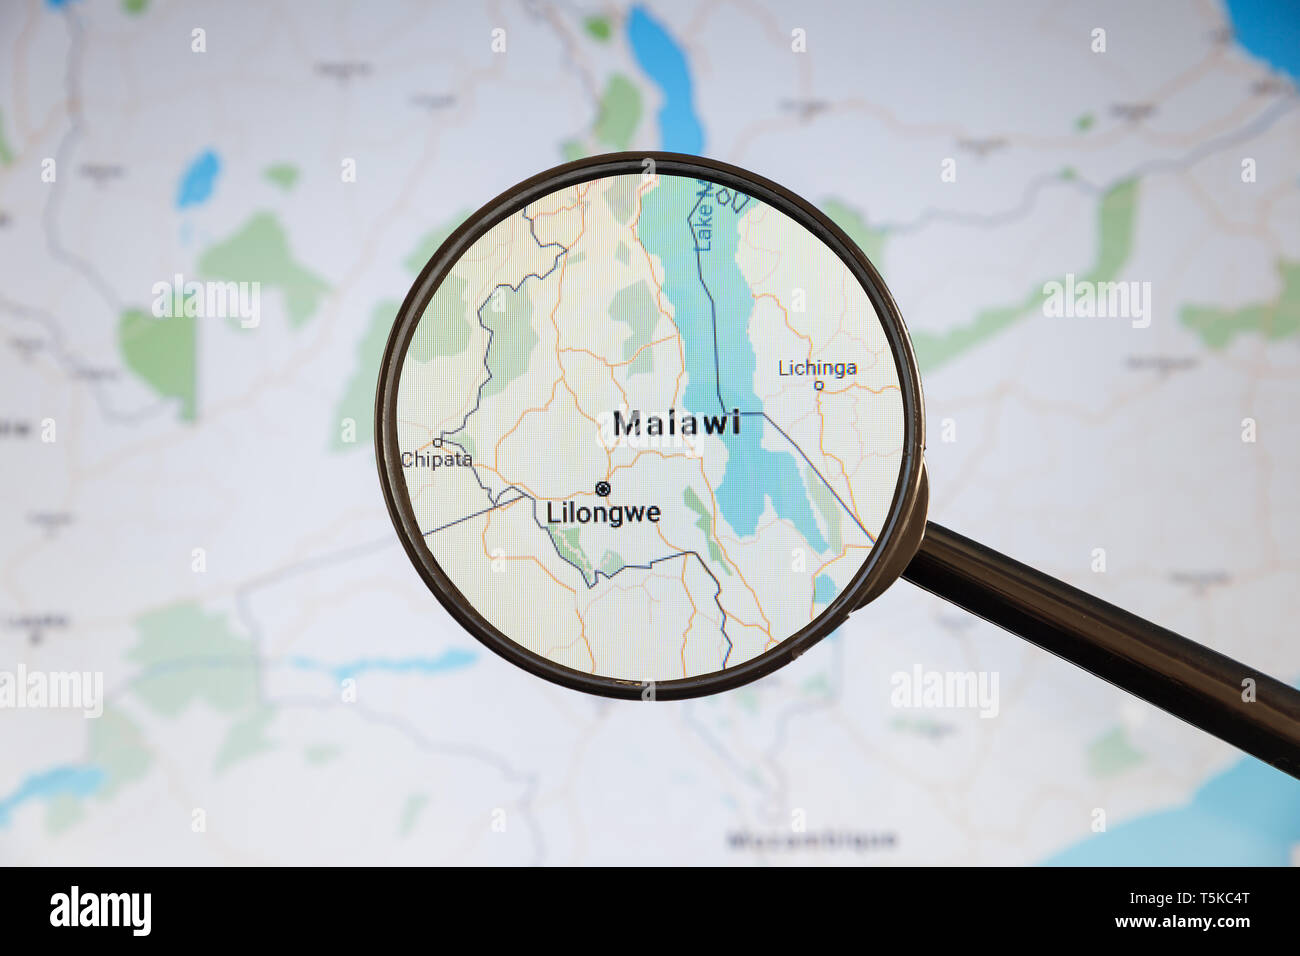 Lilongwe, Malawi. Political map. City visualization illustrative concept on display screen through magnifying glass. Stock Photo